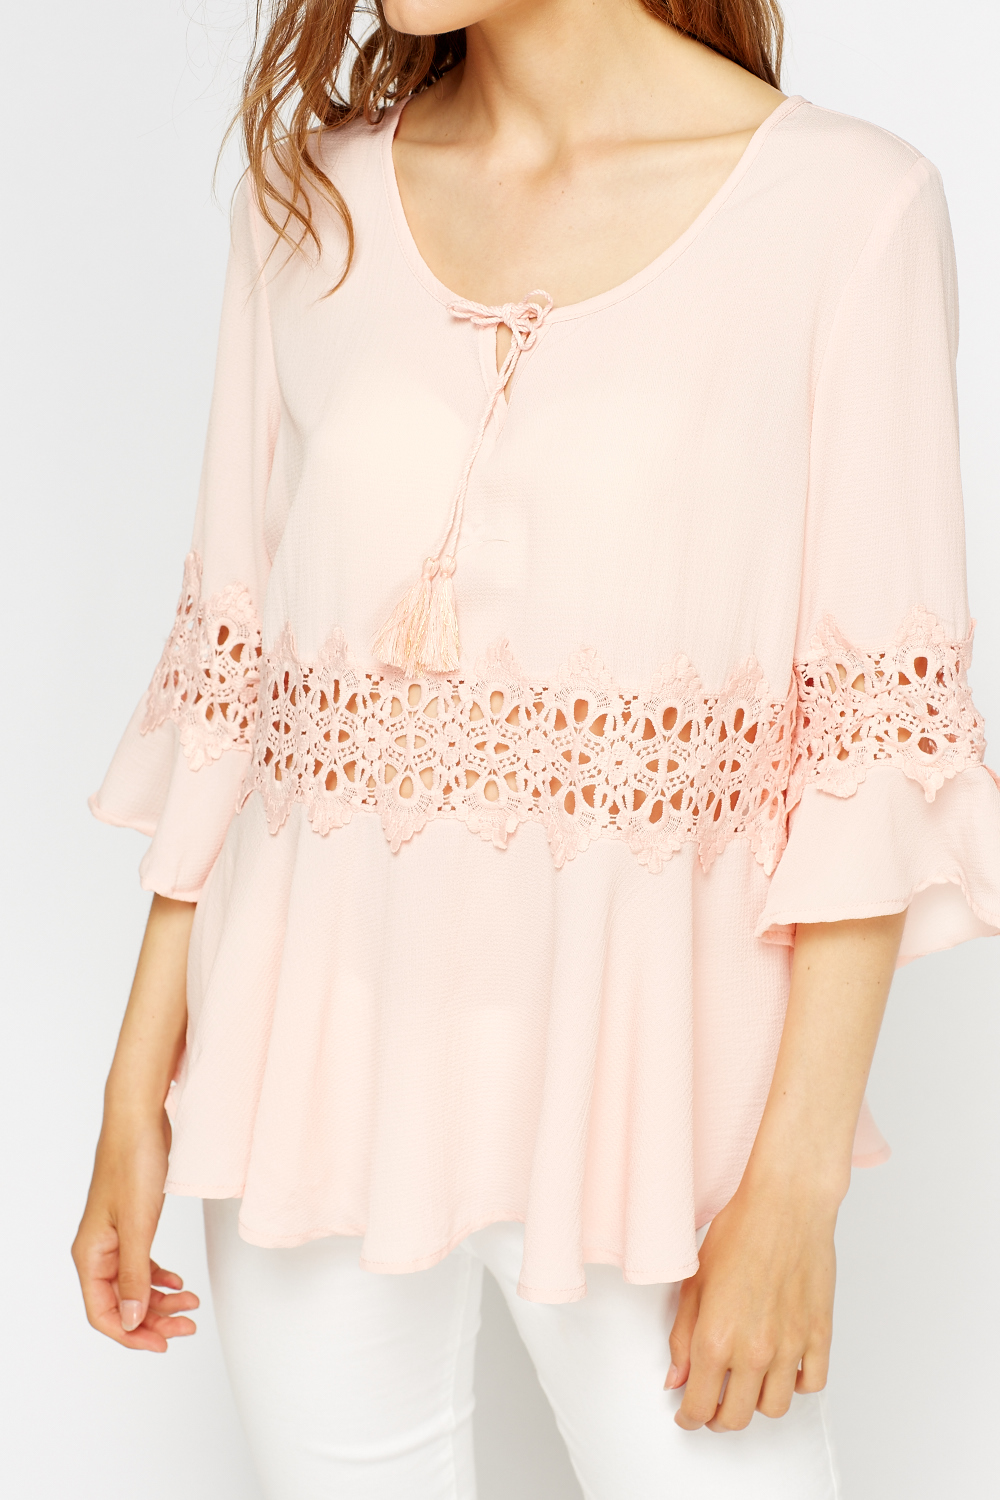 Peasant Lace Insert Top - Just $7